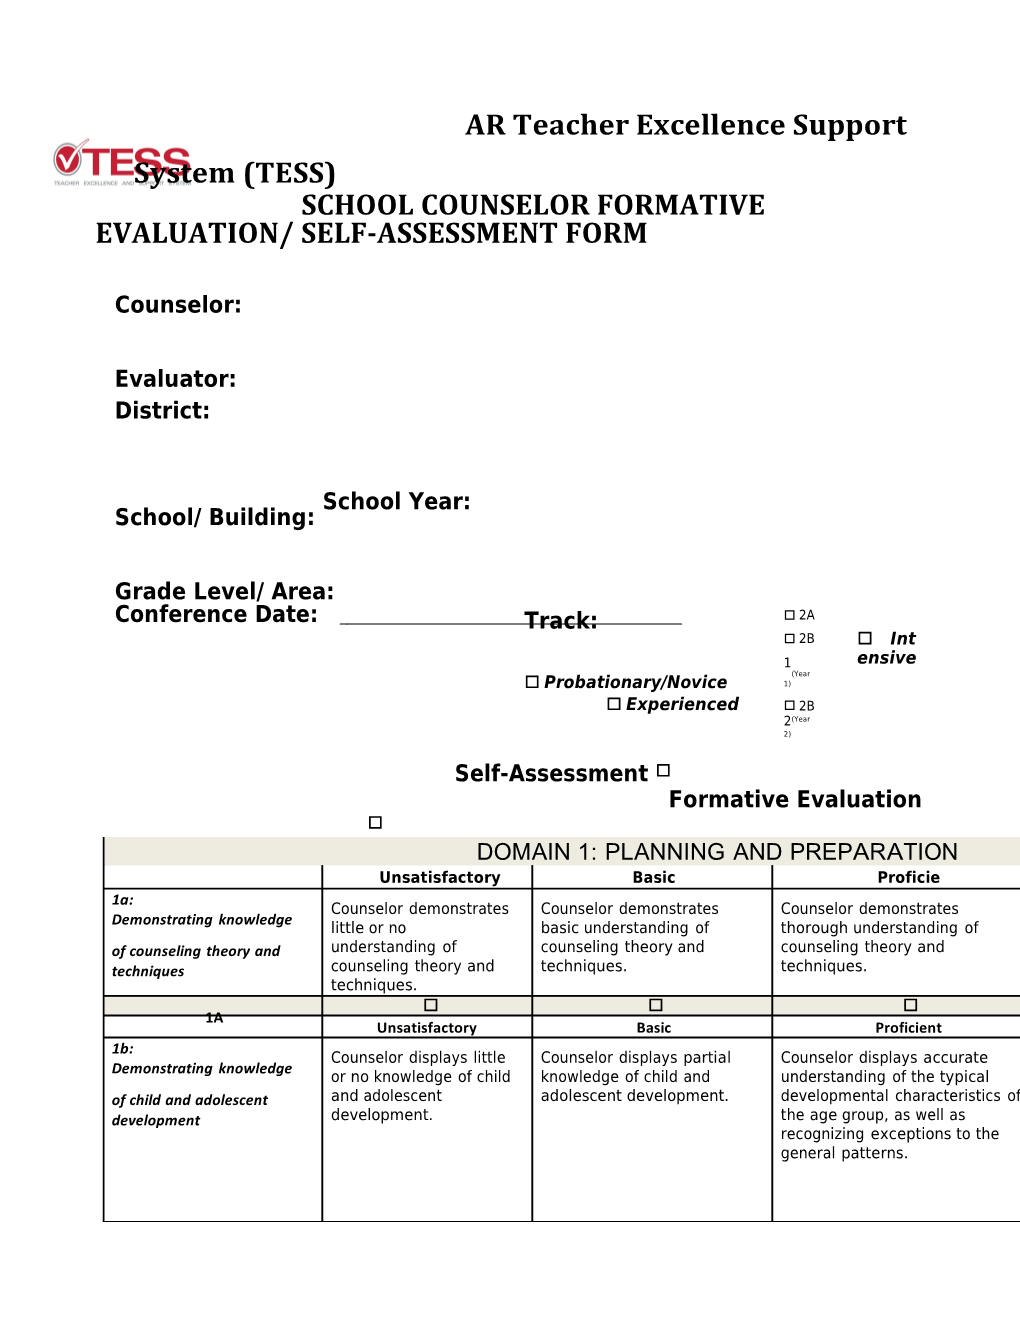 School Counselor Formative Evaluation/ Self-Assessment Form